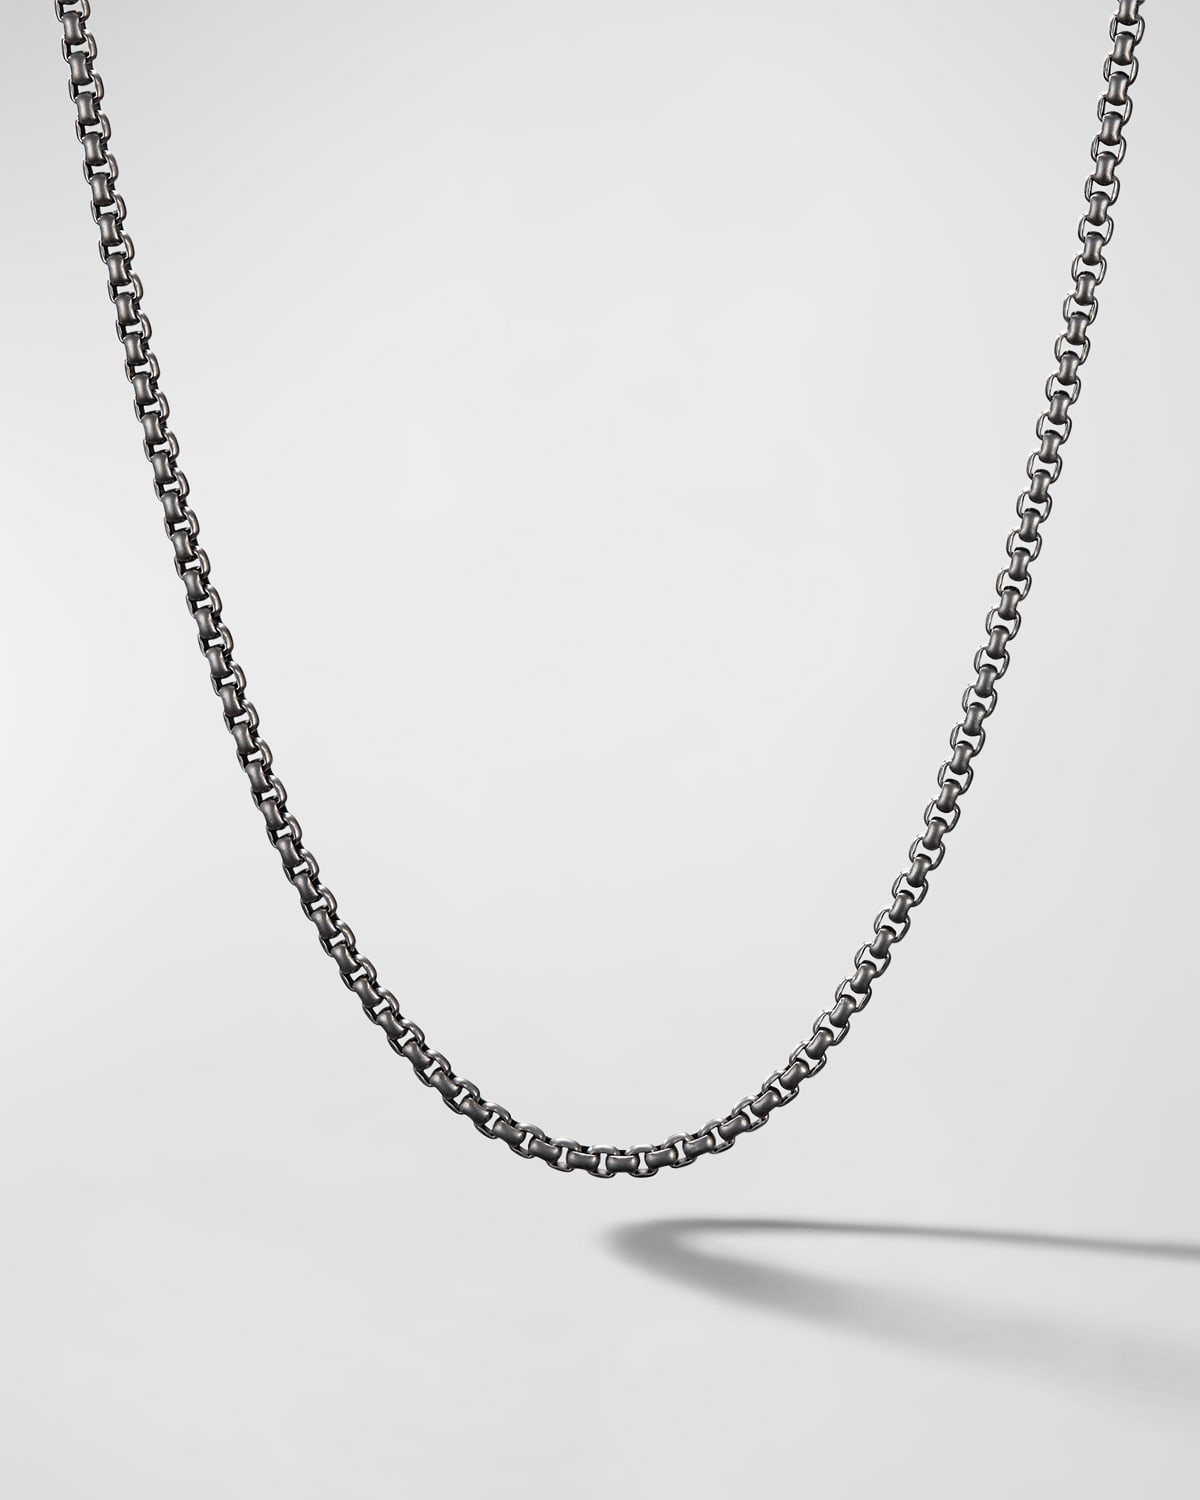 Men's Box Chain Necklace in Darkened Stainless Steel, 2.7mm, 20"L